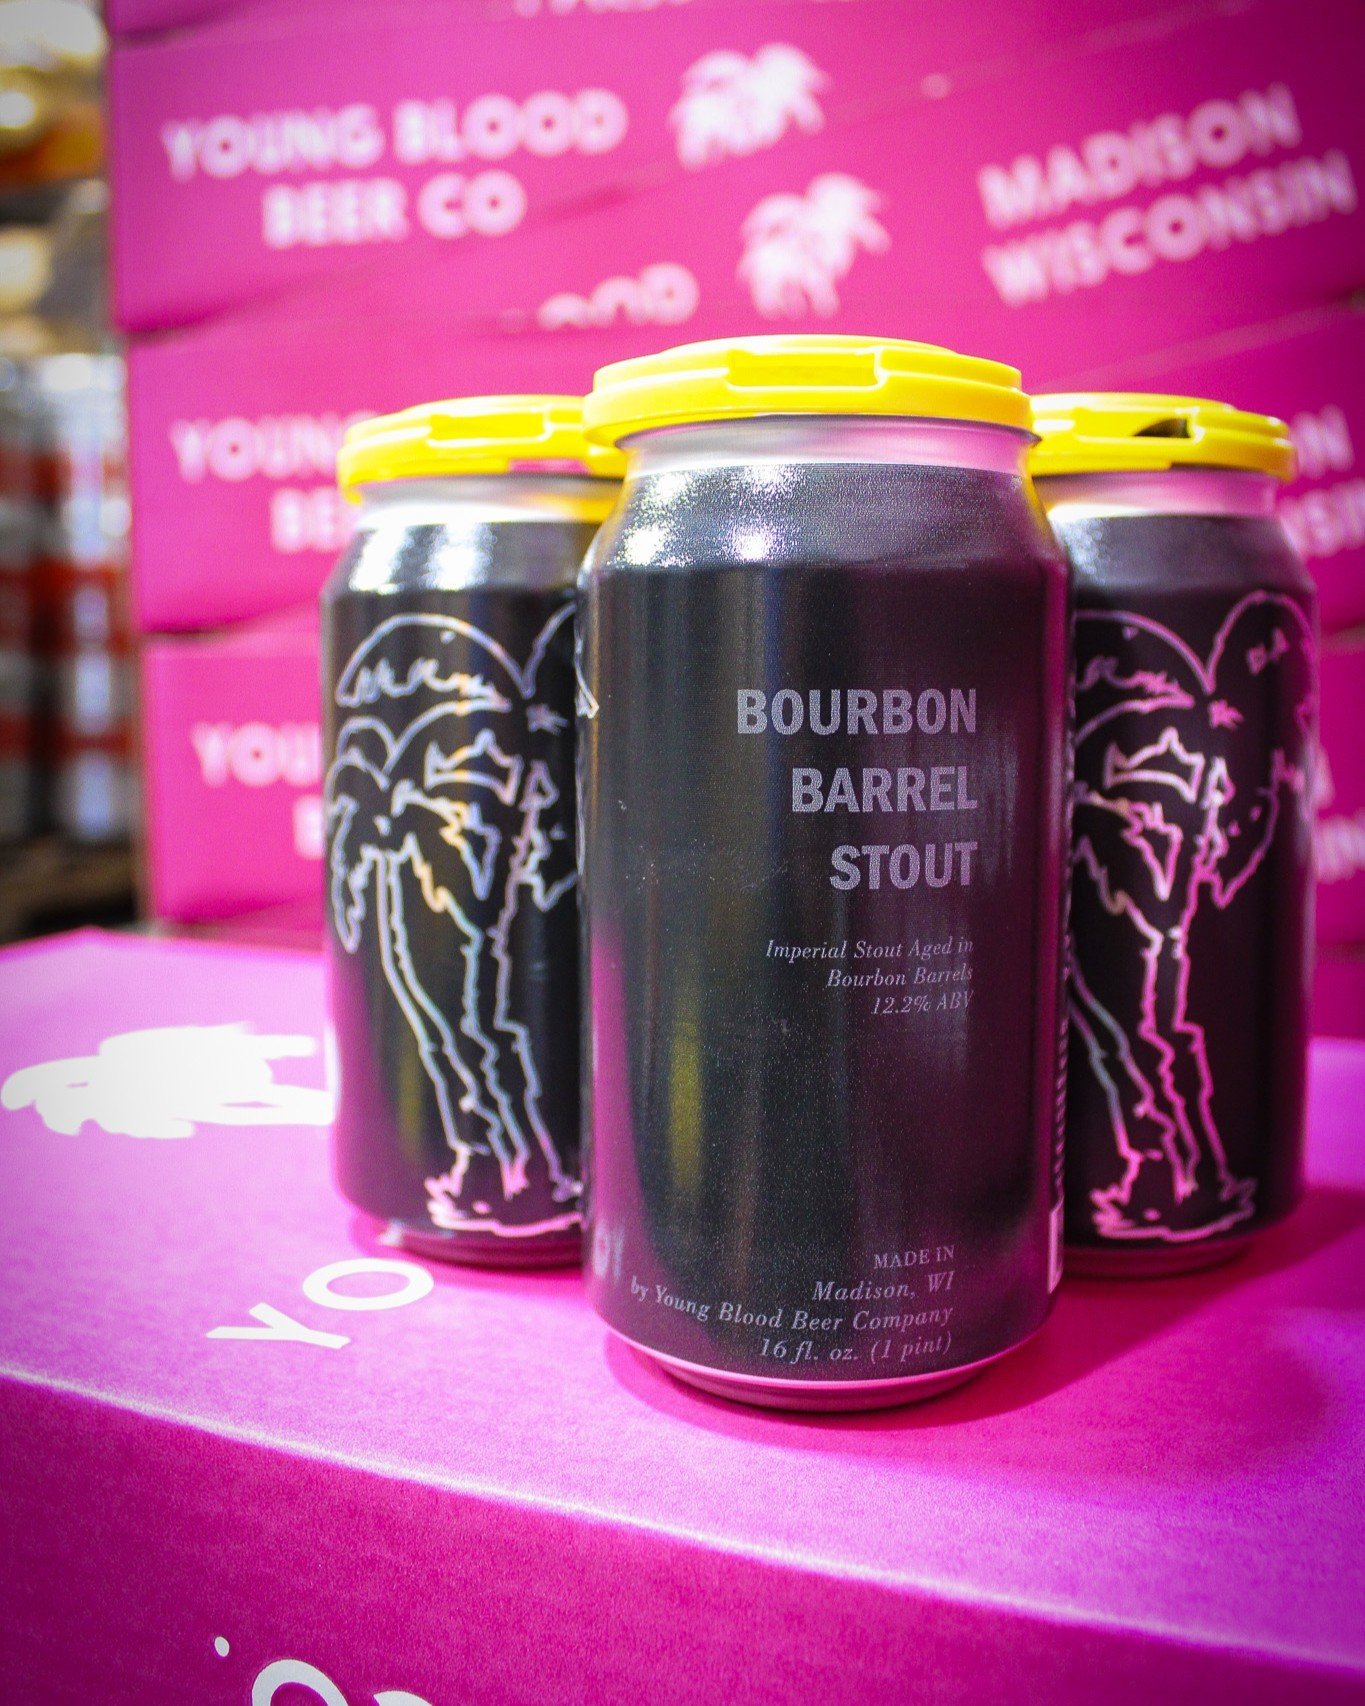 ON TAP NOW: Our first ever Bourbon Barrel Stout is on tap RN at our King Street Location! 

We have a limited number of four packs in stock at our King Street location if you're into that try b4 you buy sort of situation. But they will not be here fo